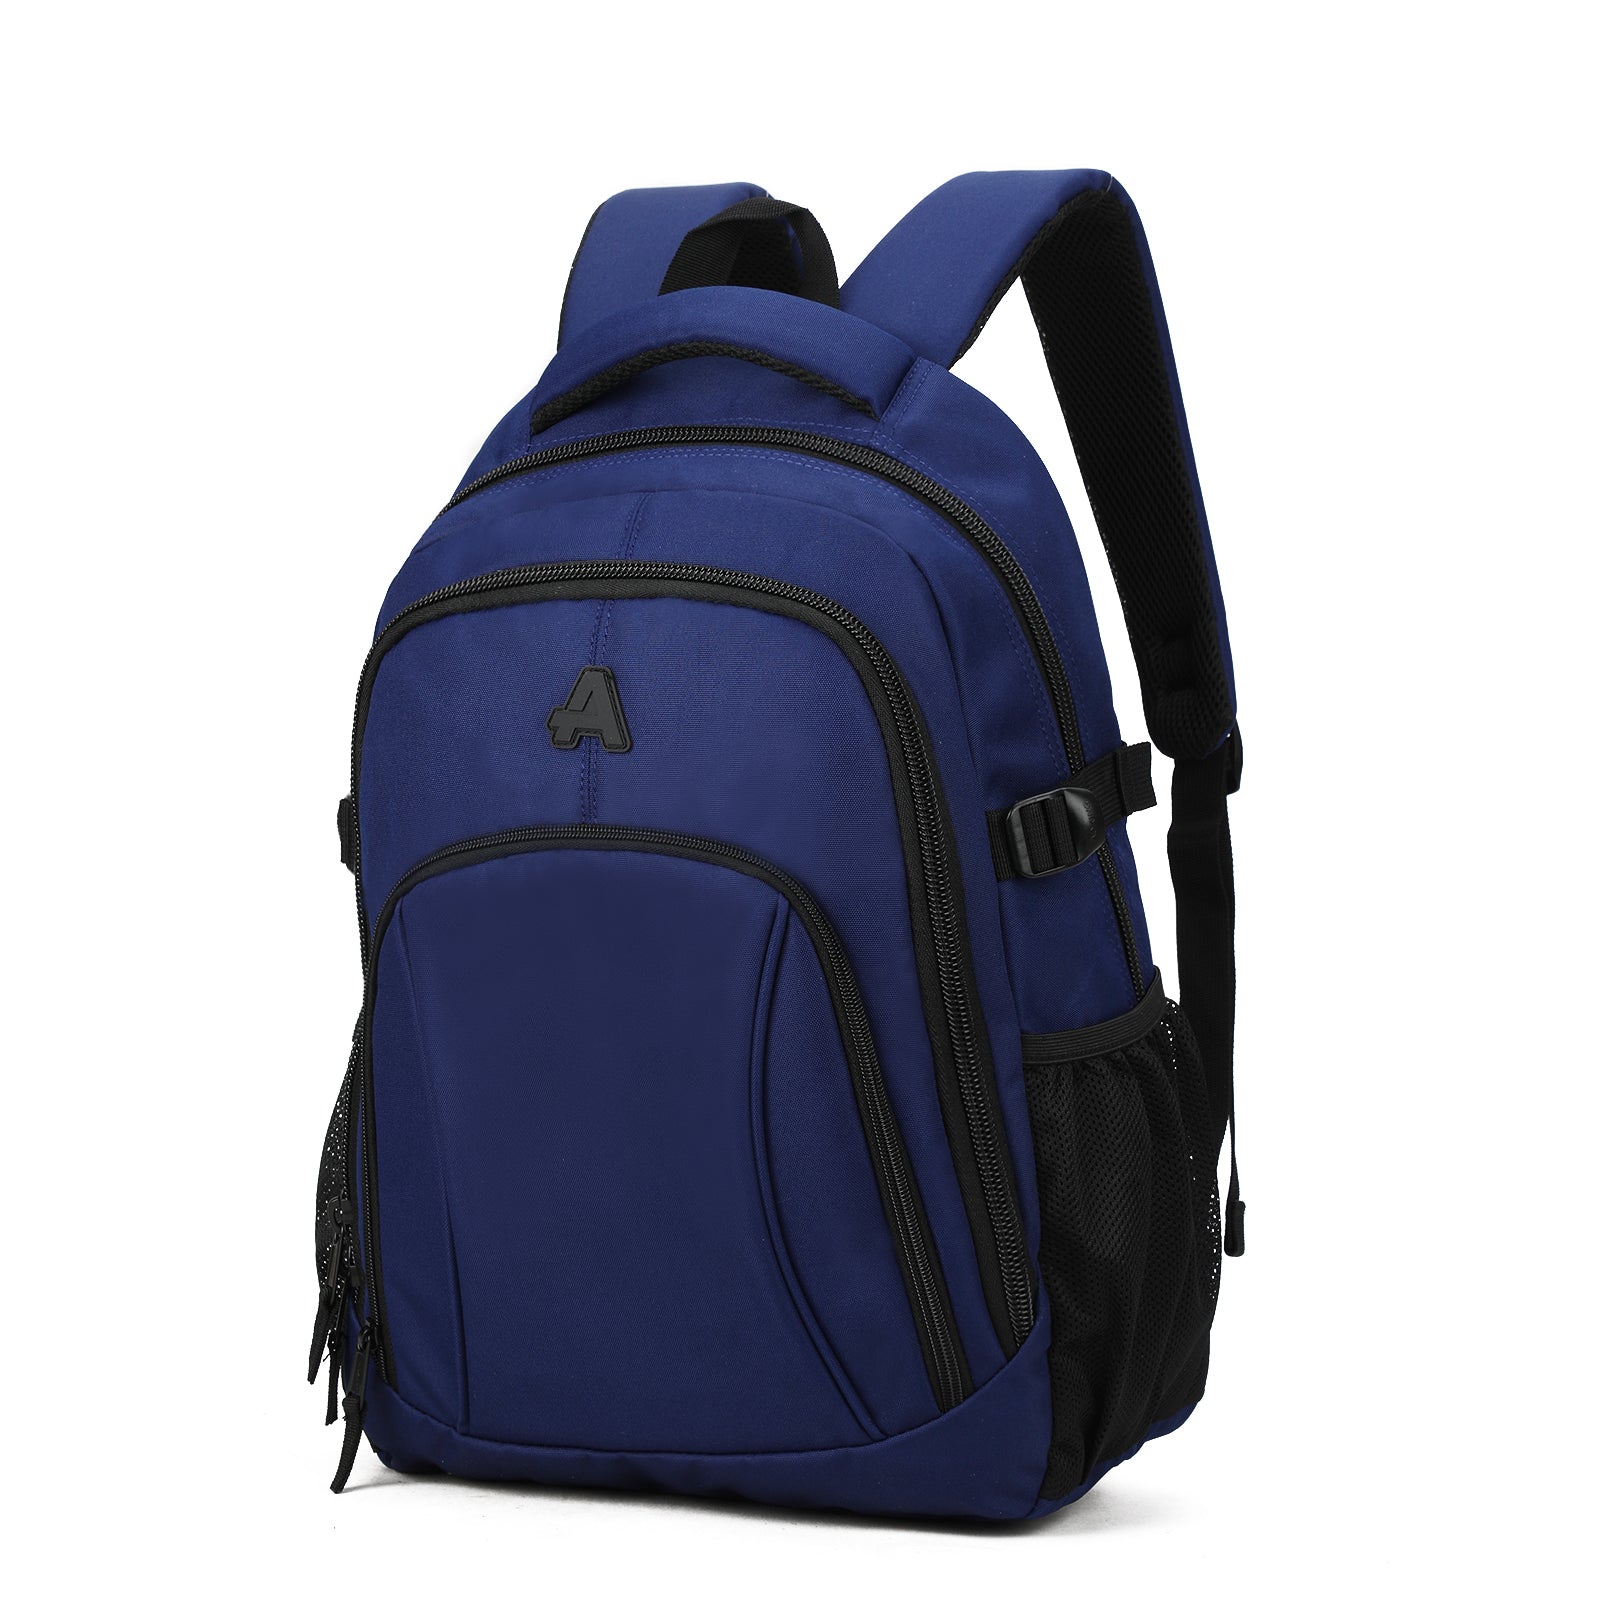 Aoking Travel Backpack XN2610 Navy